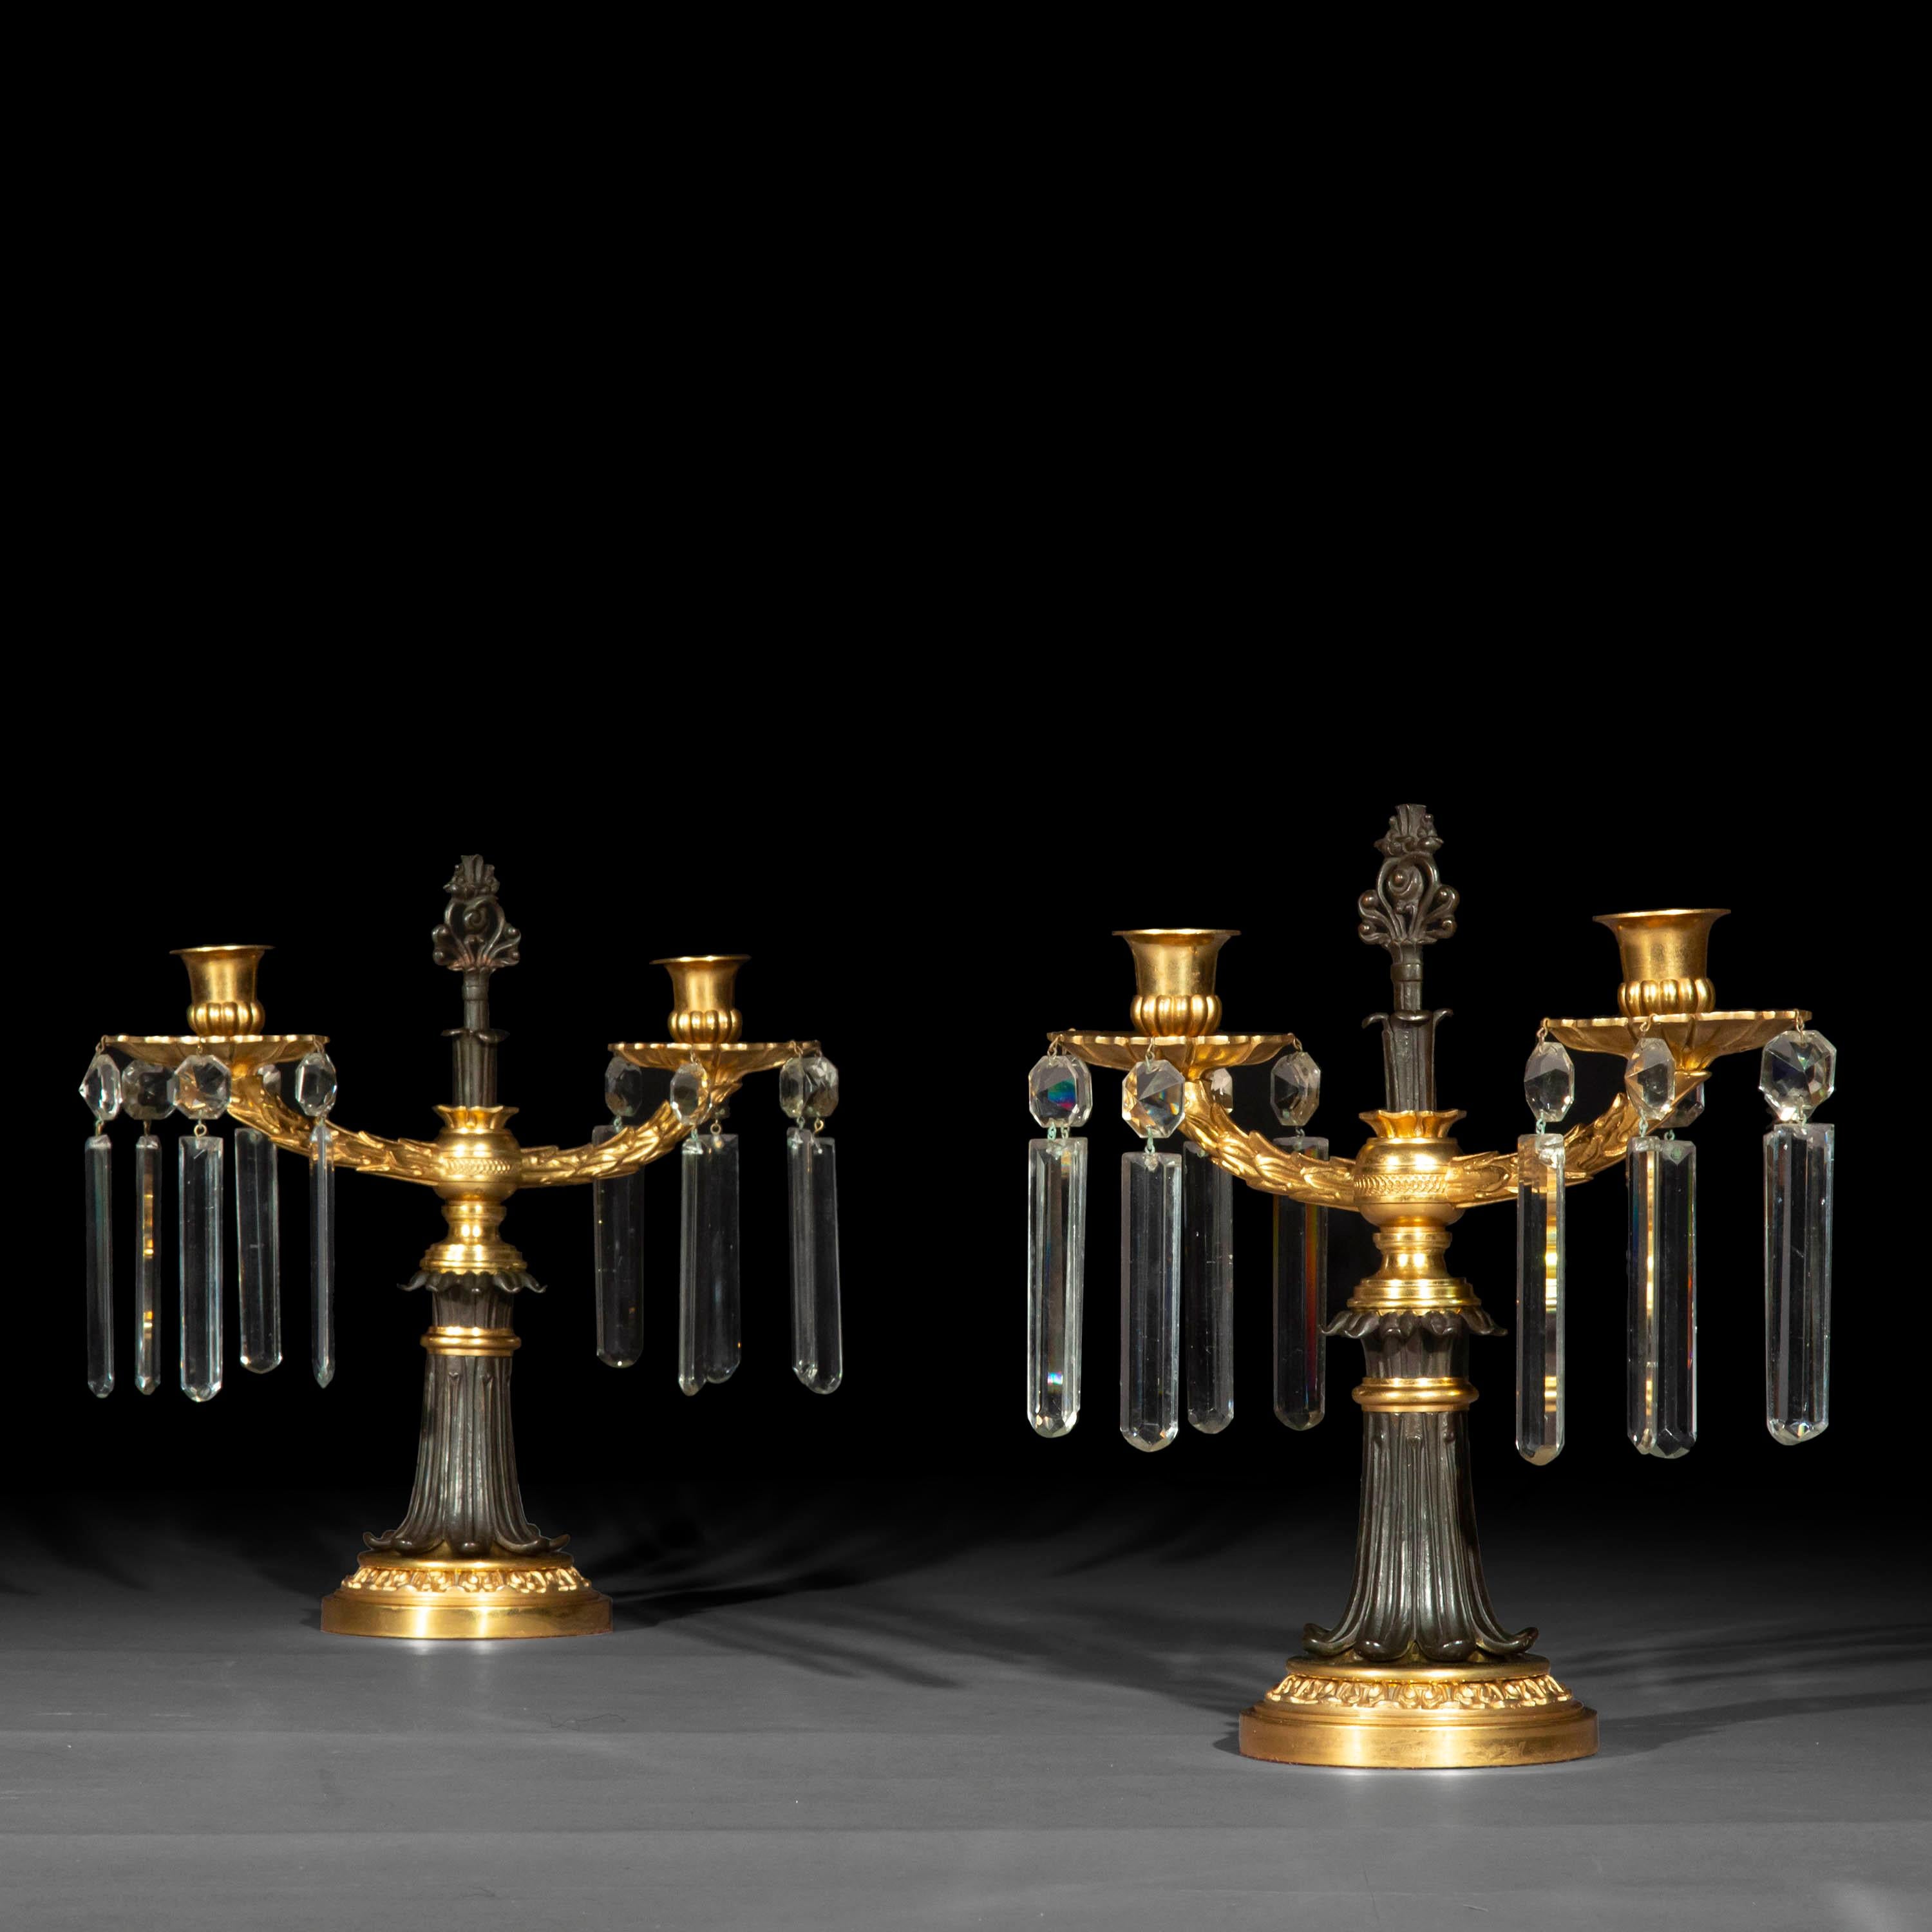 A fine pair of Regency period gilded and patinated bronze candelabra or candlesticks.

English, circa 1810.


Why we like them
Exquisite, late neoclassical design; beautiful contrast of the gilded  and patinated bronze. A splendid accent in a